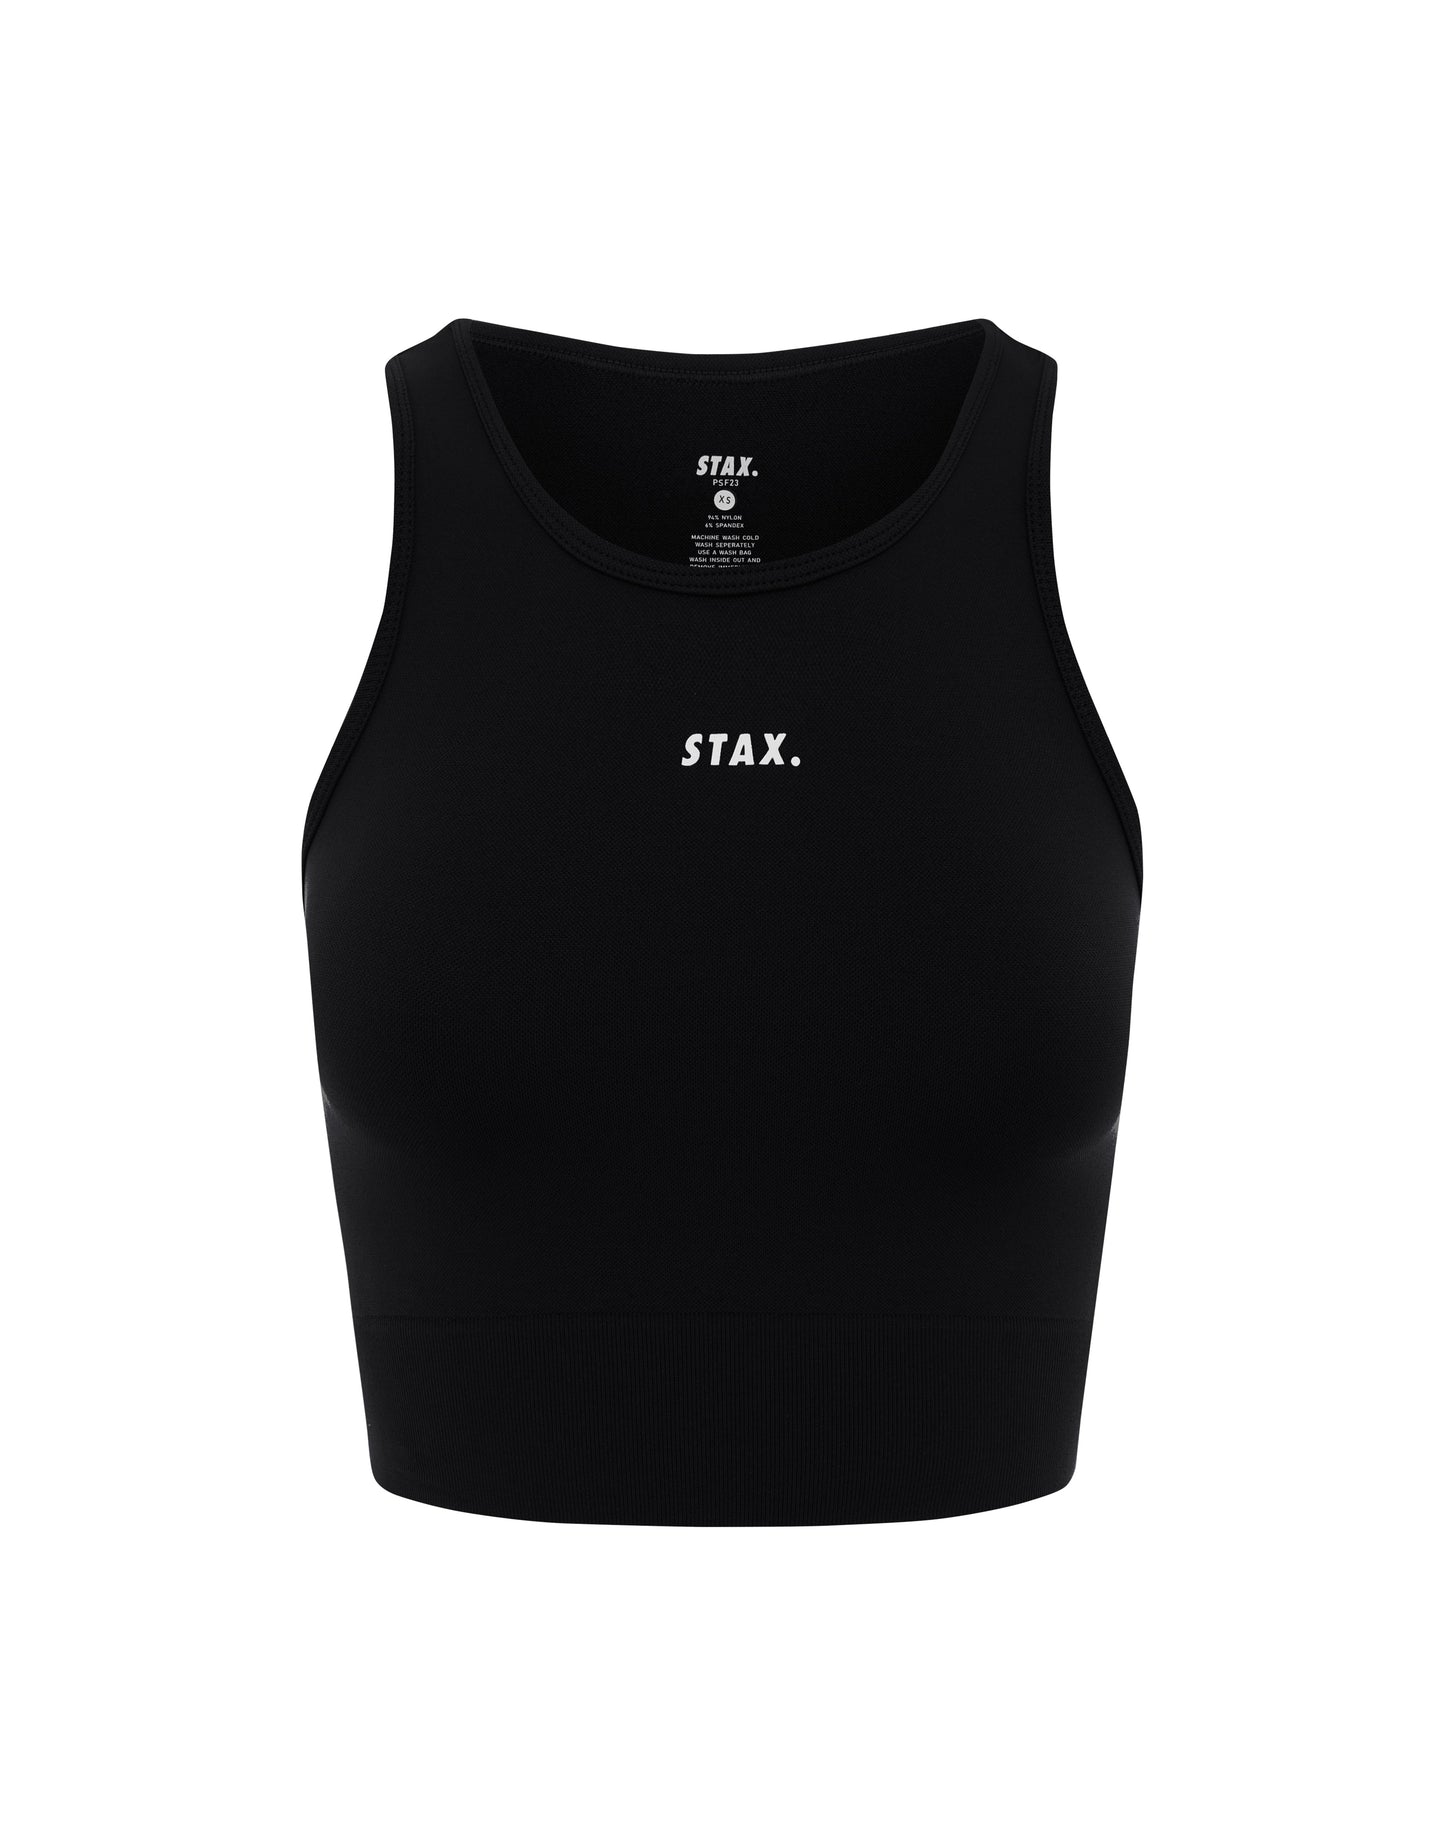 STAX. PSF Cropped Singlet - Astro